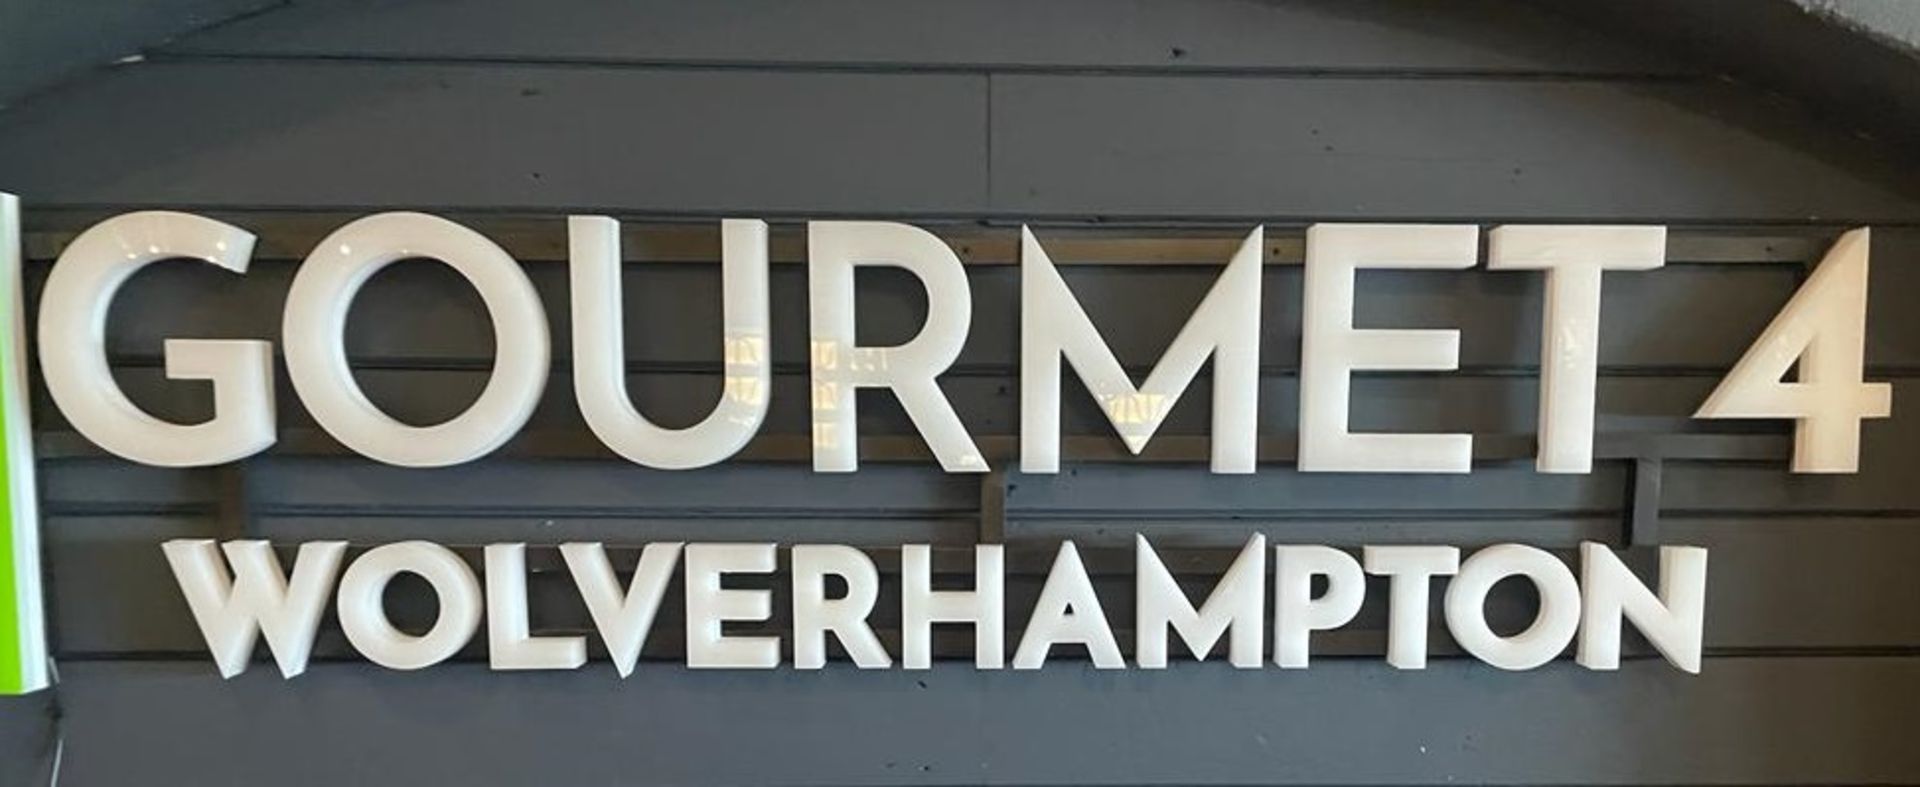 1 x Wall Mounted Illuminated Sign - Gourmet 4 Wolverhampton - Ref: 80 - CL864 - Location: - Image 7 of 7